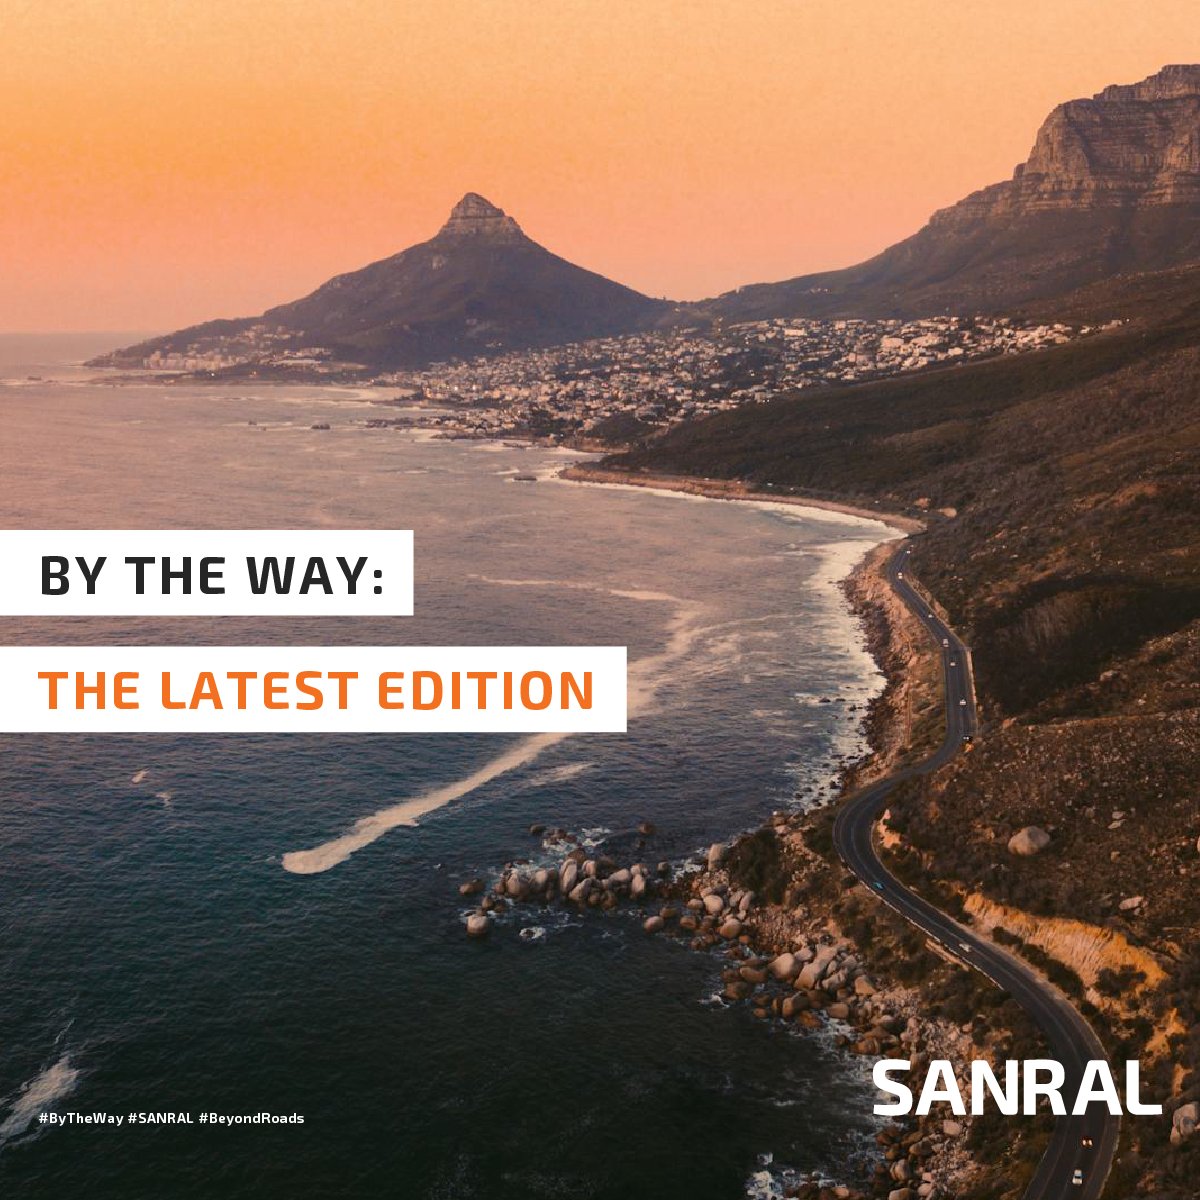 The latest edition of By The Way is out now! Get road safety tips, project updates, fun activities for the kids, and much more. Read #ByTheWay here: bit.ly/4a9TVrV #SANRAL #BeyondRoads